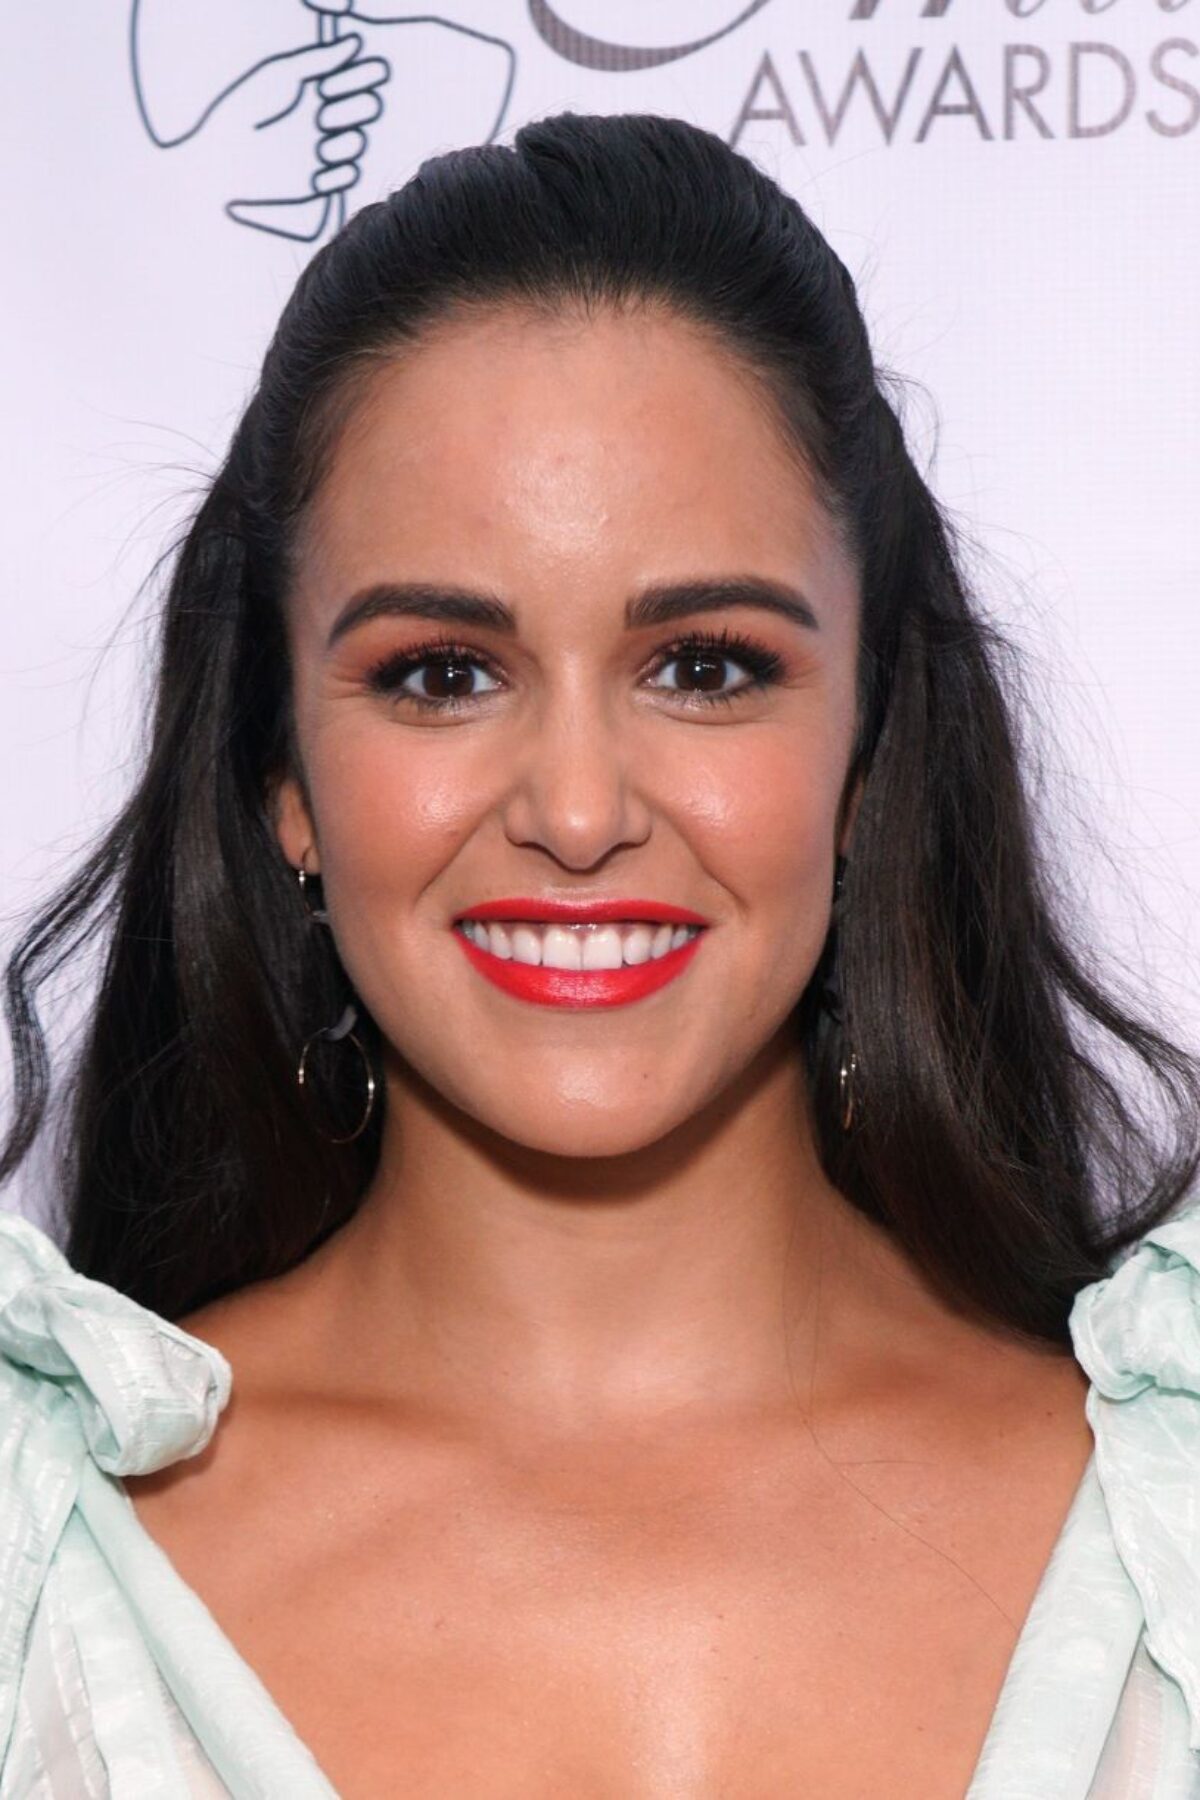 BEVERLY HILLS, CALIFORNIA - AUGUST 10: Actress Melissa Fumero attends the 34th Annual Imagen Awards at the Beverly Wilshire Four Seasons Hotel on August 10, 2019 in Beverly Hills, California. (Photo by JC Olivera/Getty Images)